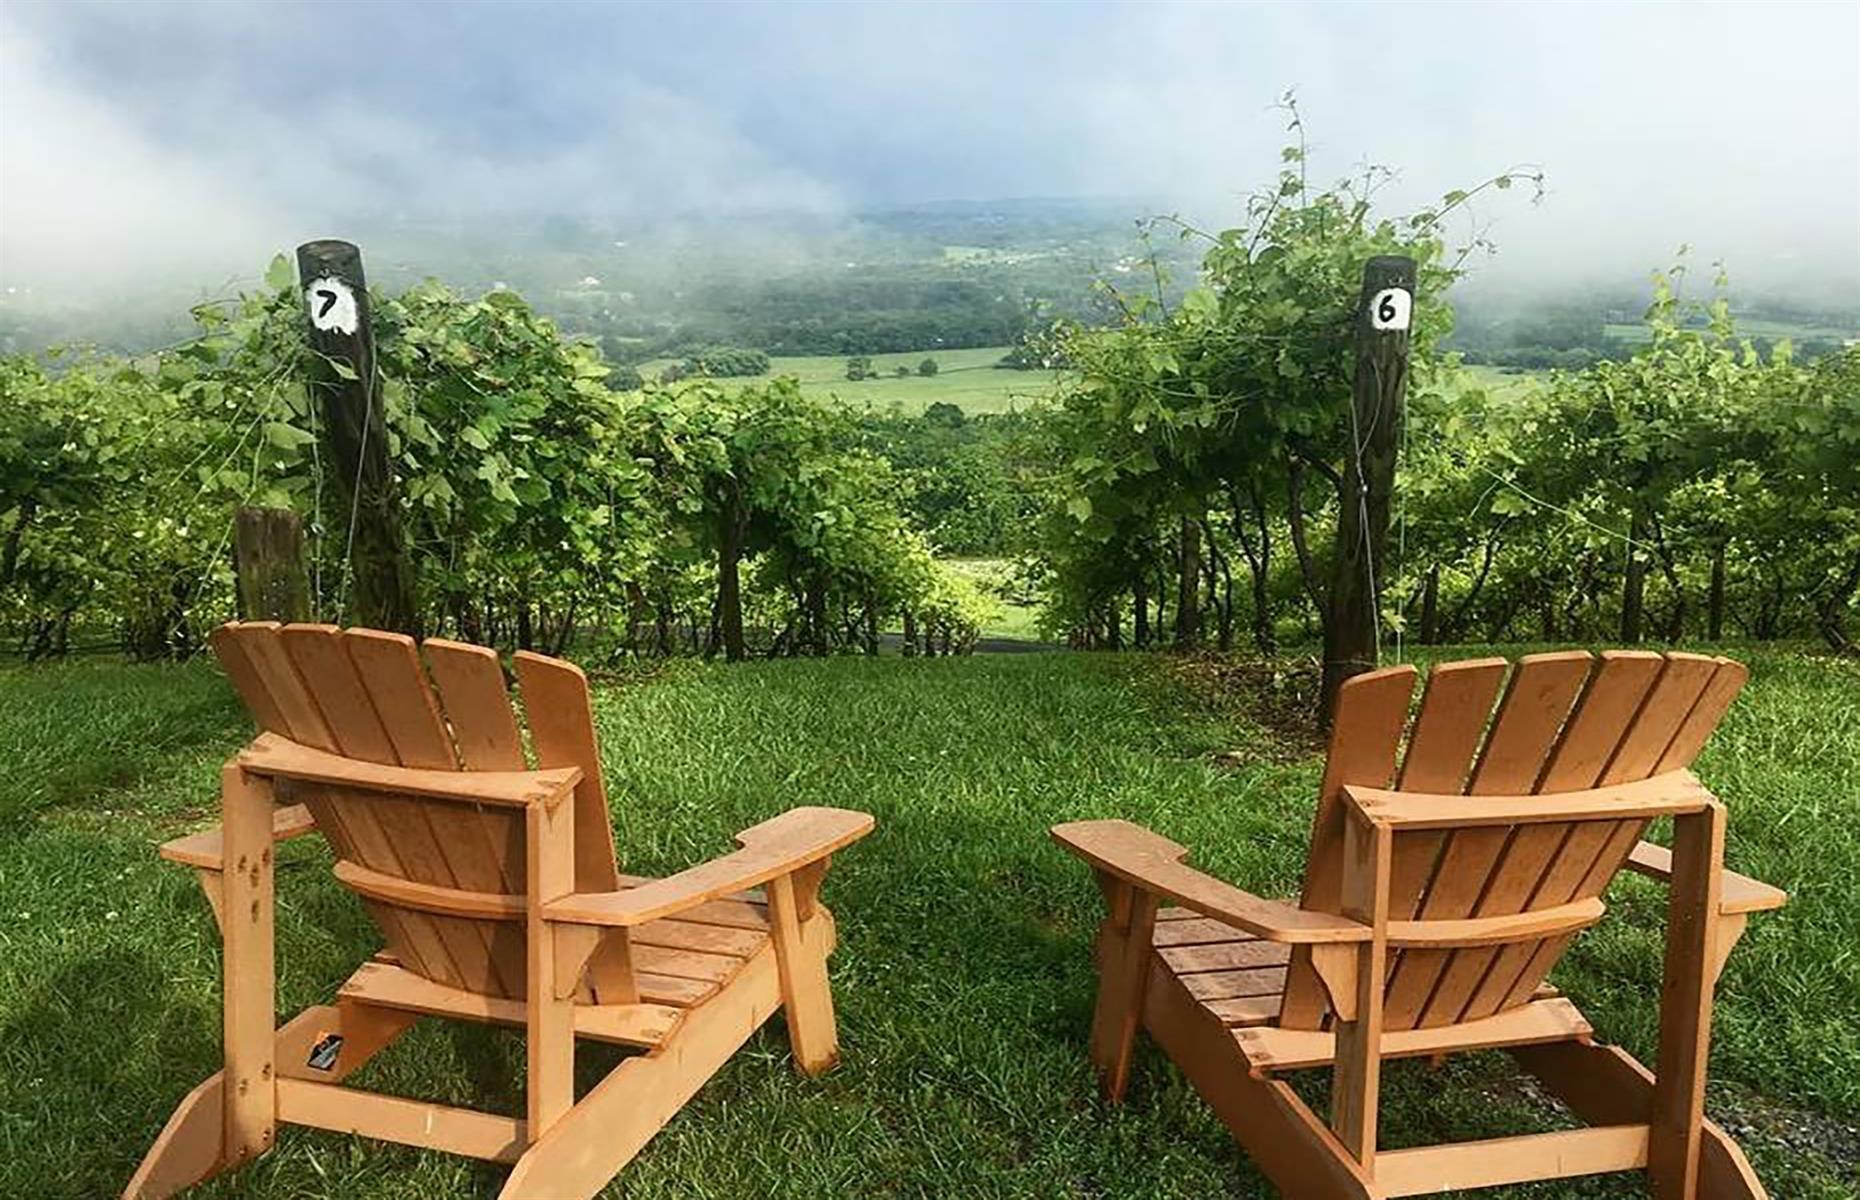 <p>We can think of worse places to relax with a glass of vino than at Virginia’s <a href="https://www.bluemontvineyard.com/">Bluemont Vineyard</a>, overlooking the stunning Blue Ridge Mountains. But it’s not just great scenery on offer here. As well as a range of tours and tastings of Albariño and bold red blends, Bluemont offers more unusual experiences like wagon rides through the orchards and fruit-picking. You can even book a seat at the chef’s table to dine on dishes made from homegrown produce, served with expertly-paired wines.</p>  <p><a href="https://www.facebook.com/loveexploringUK?utm_source=msn&utm_medium=social&utm_campaign=front"><strong>Love this? Follow us on Facebook for more travel inspiration</strong></a></p>